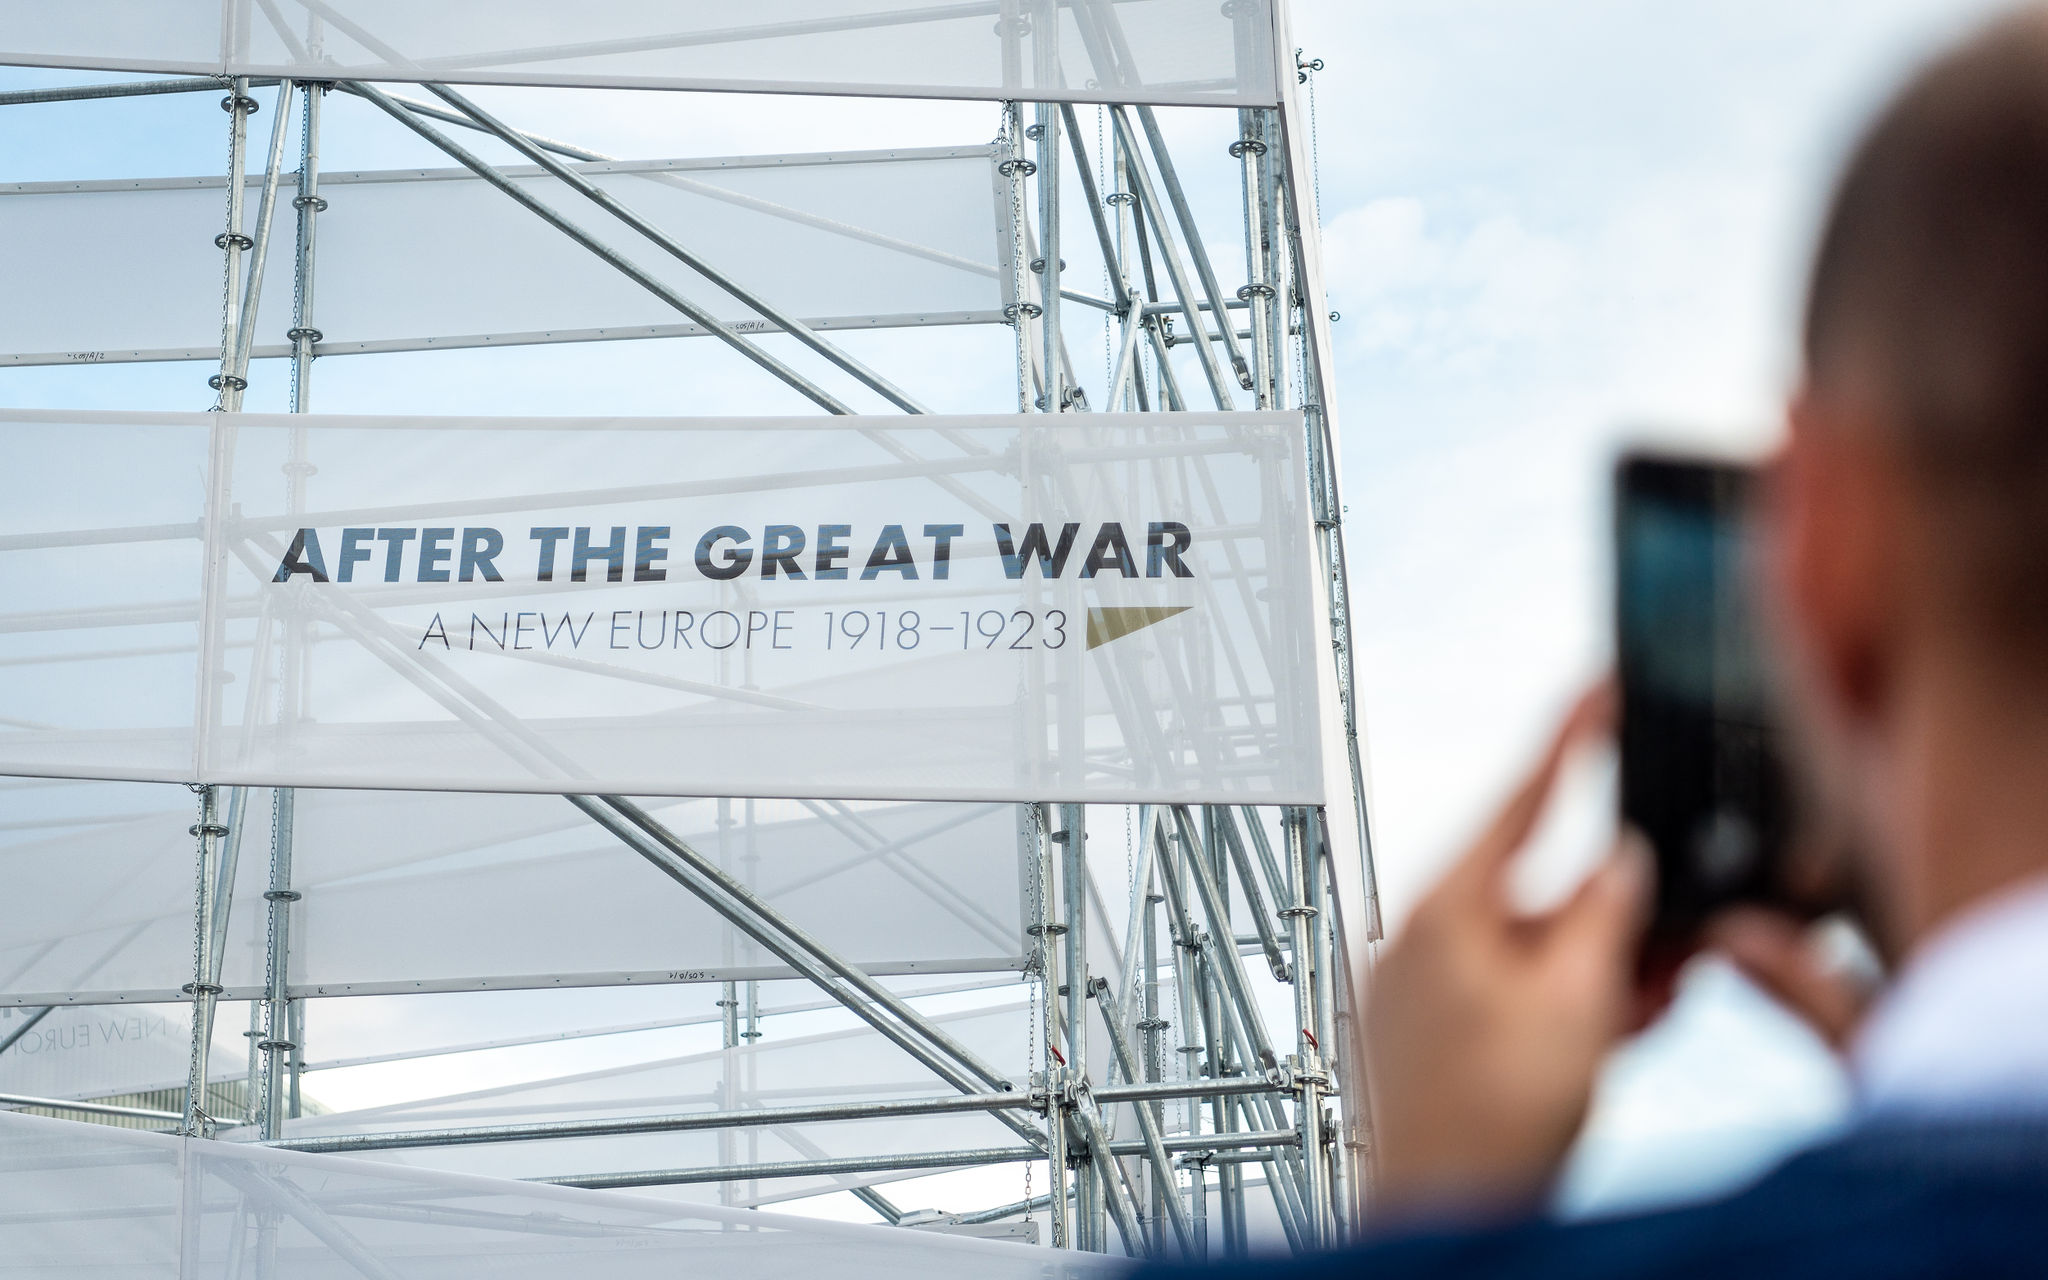 Berlin: special presentation of the After the Great War exhibition